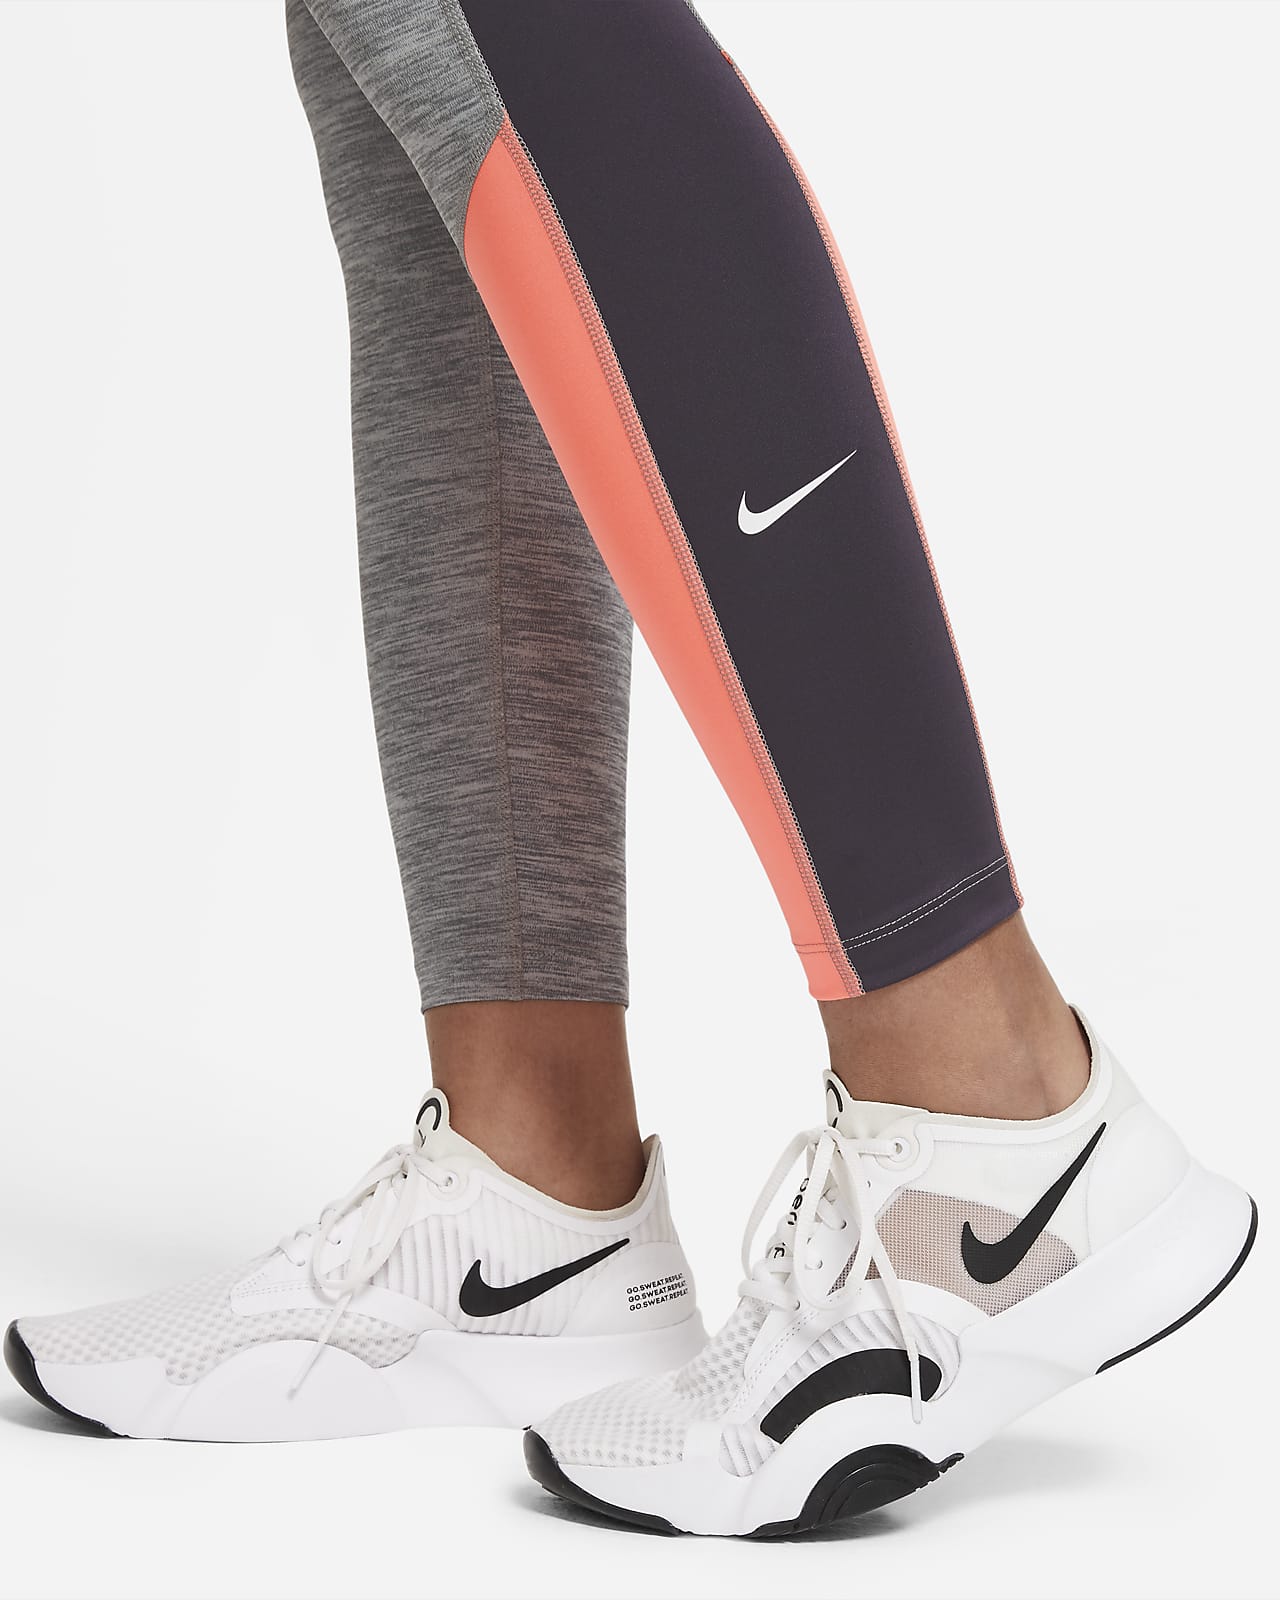 nike training one colour block tights